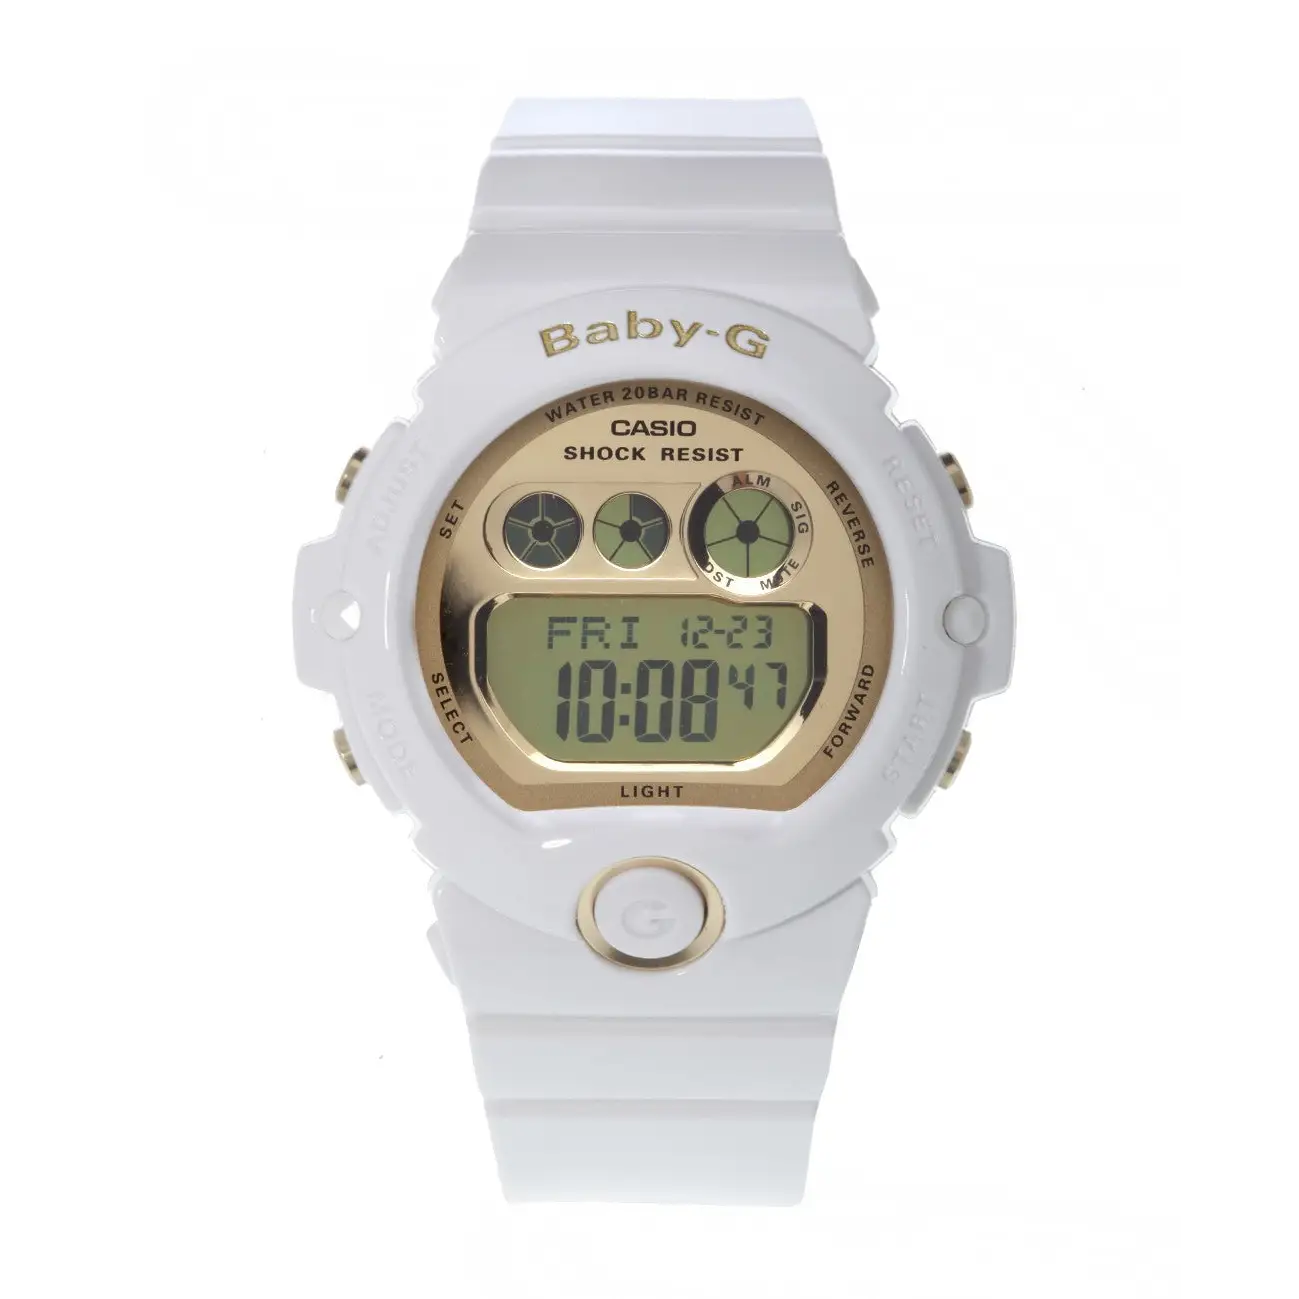 Casio Women’s Baby-G White Resin and Gold-Tone Accented